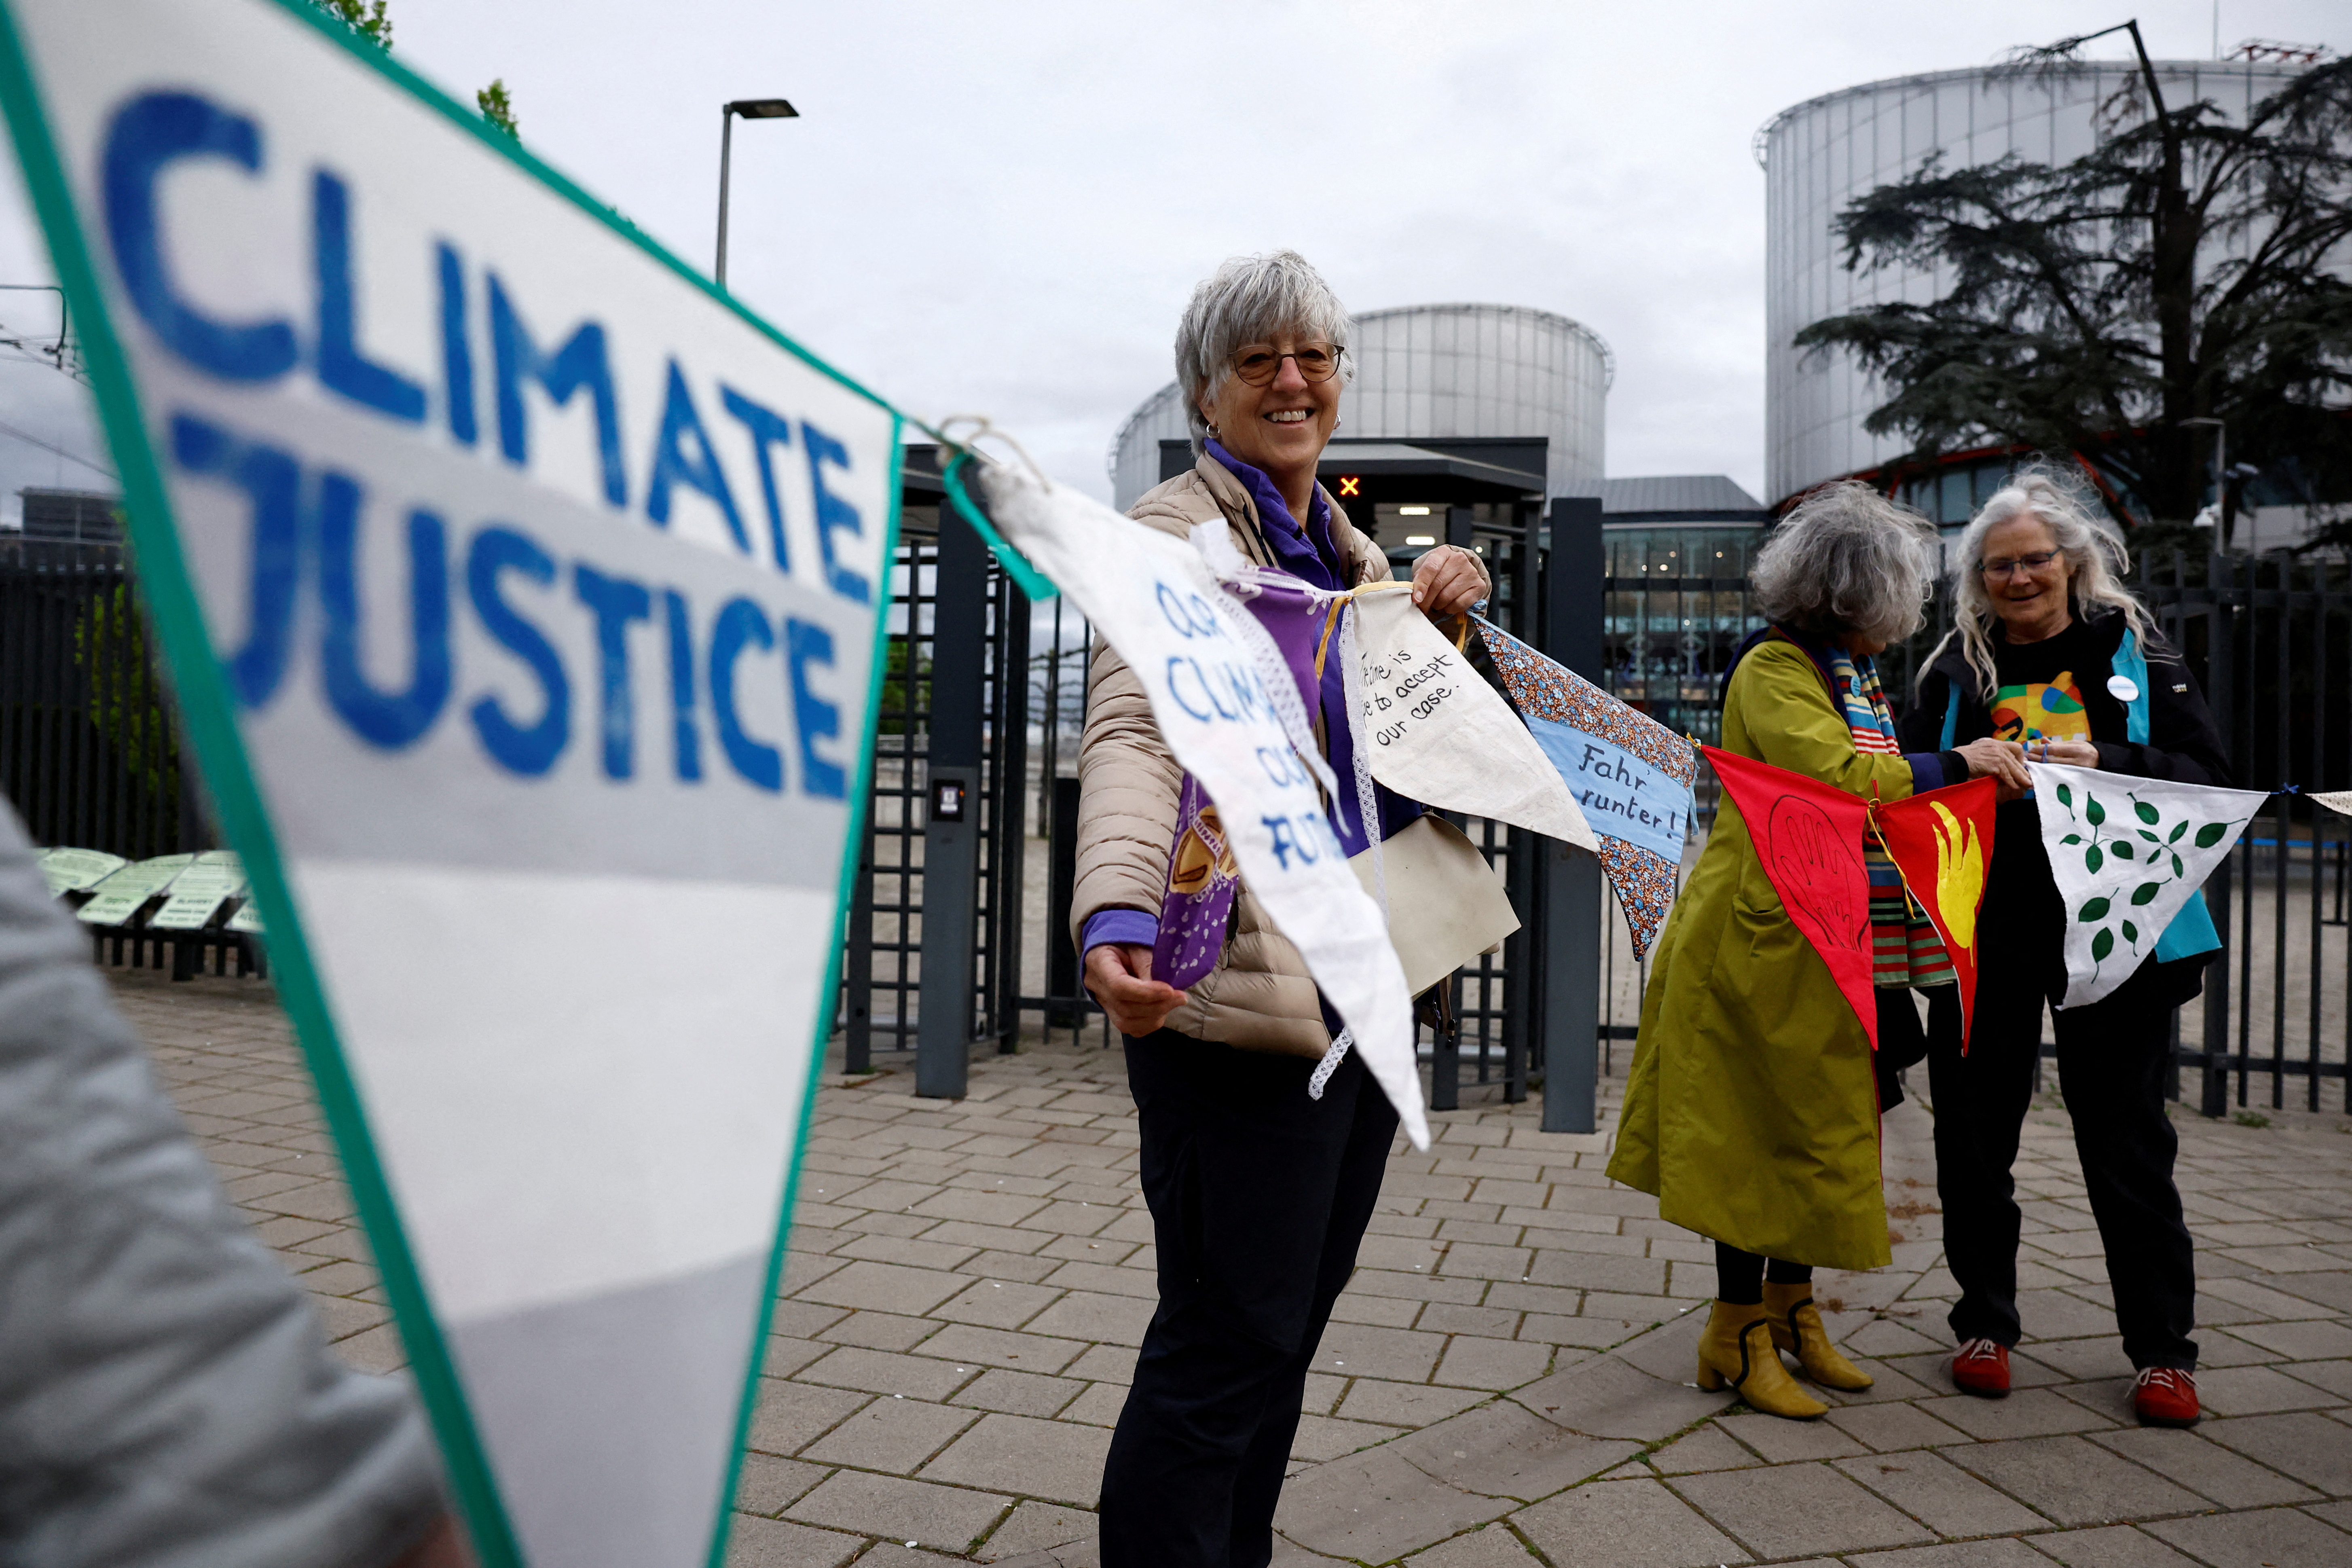 European rights court issues verdicts on three landmark climate cases